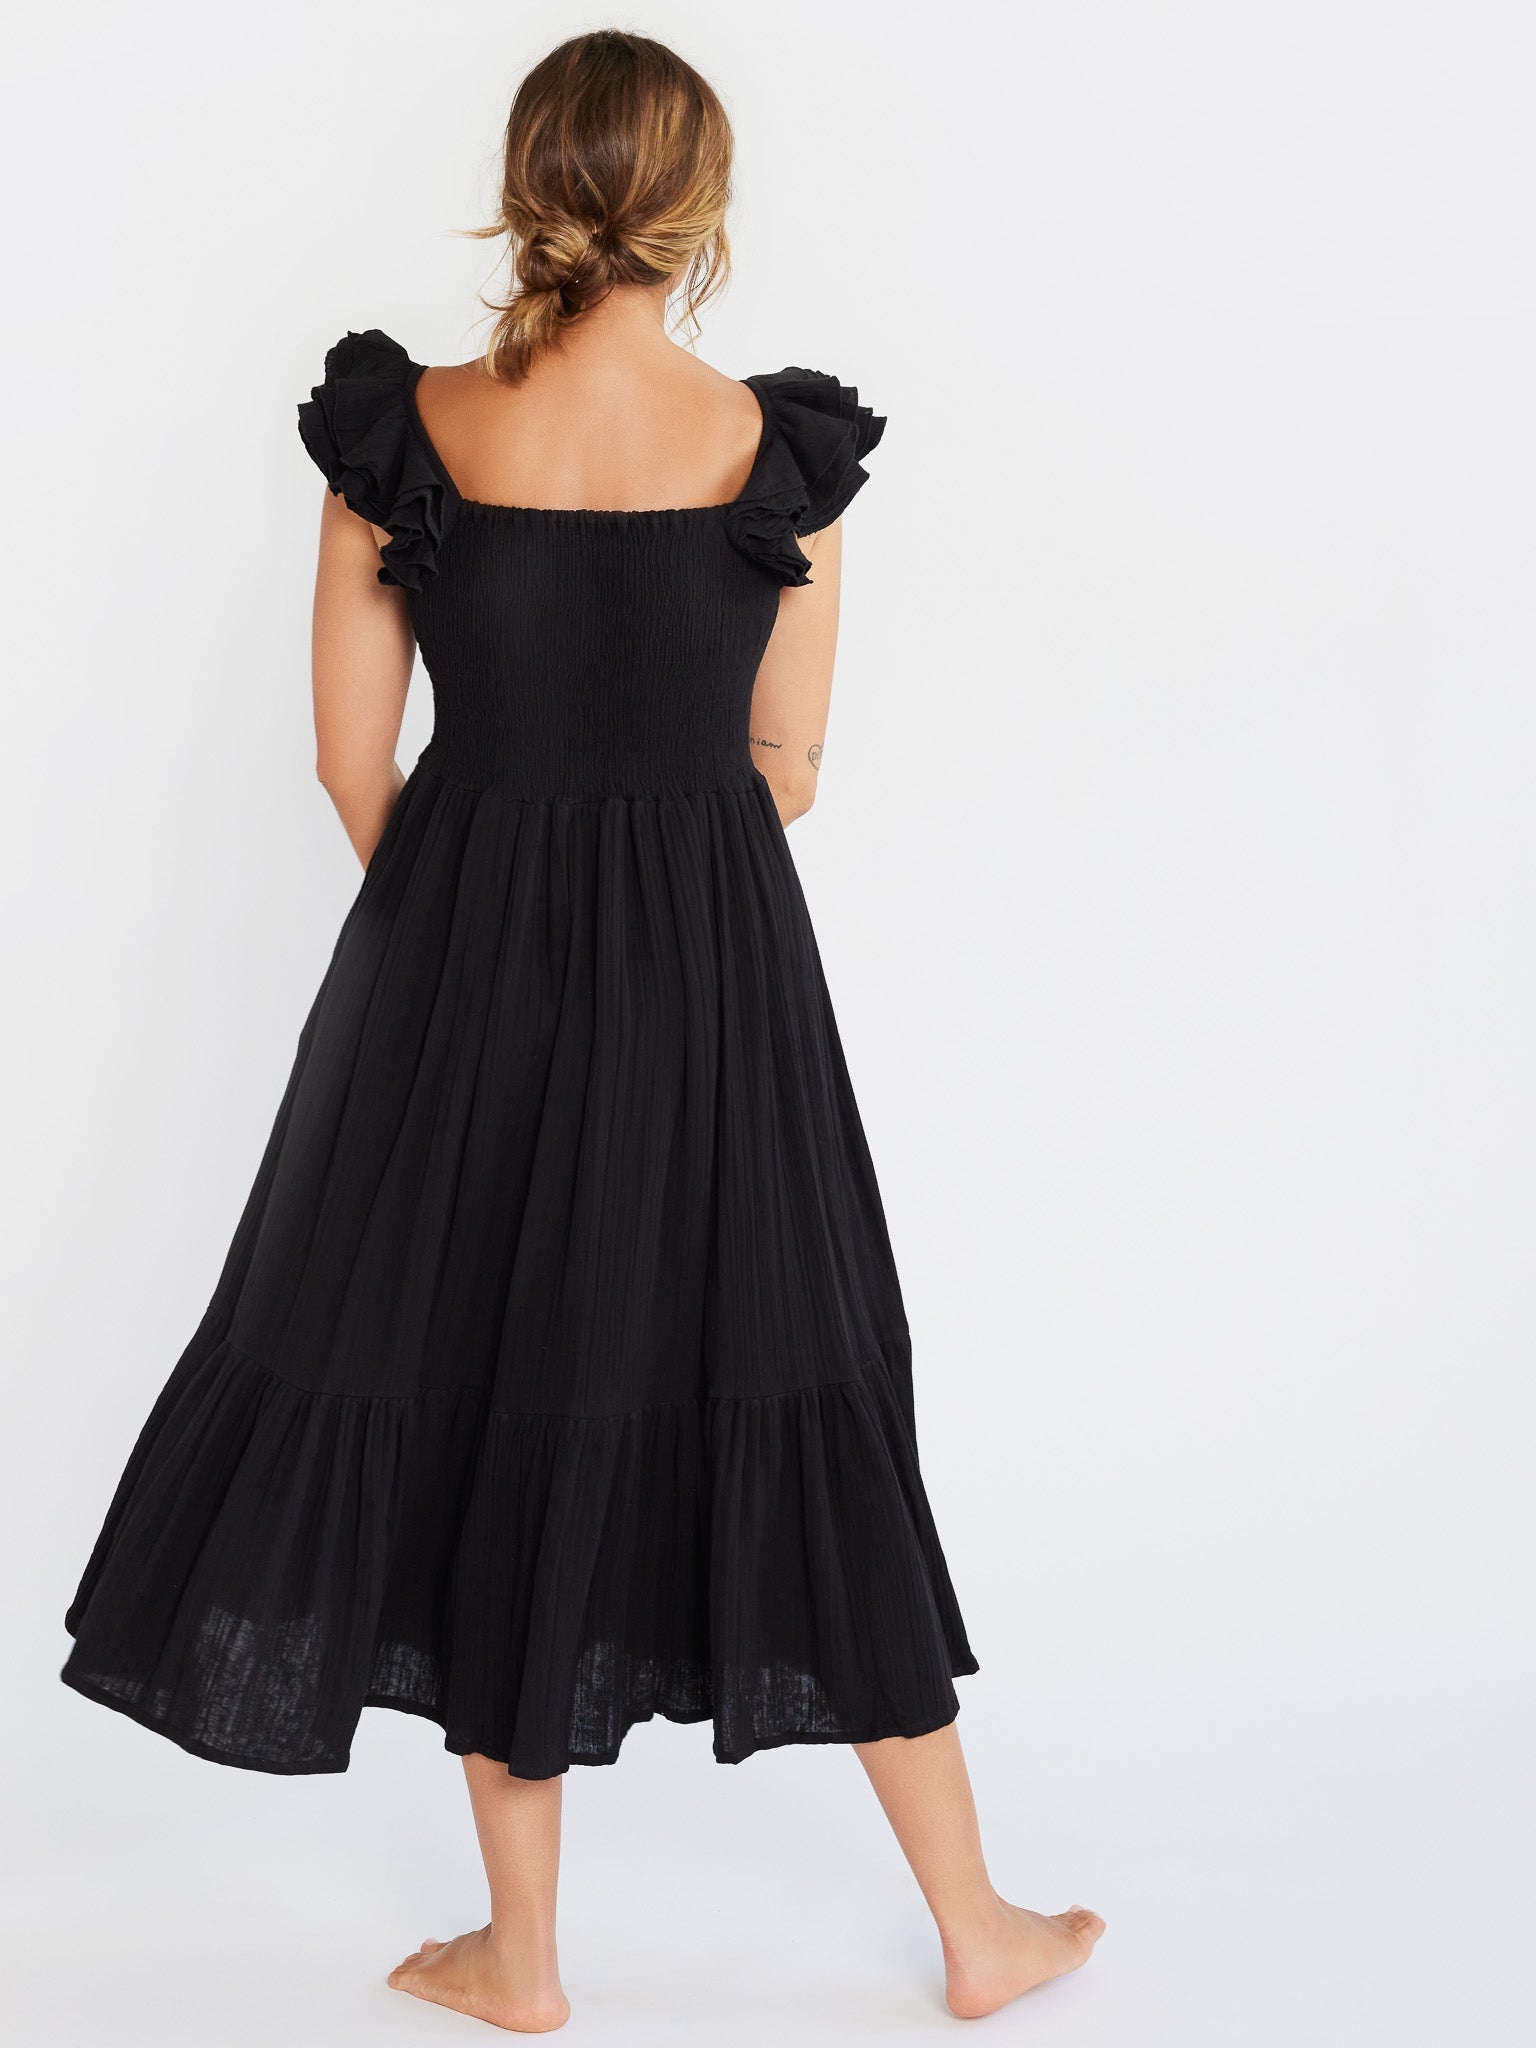 MILLE Clothing Olympia Dress in Black Double Gauze